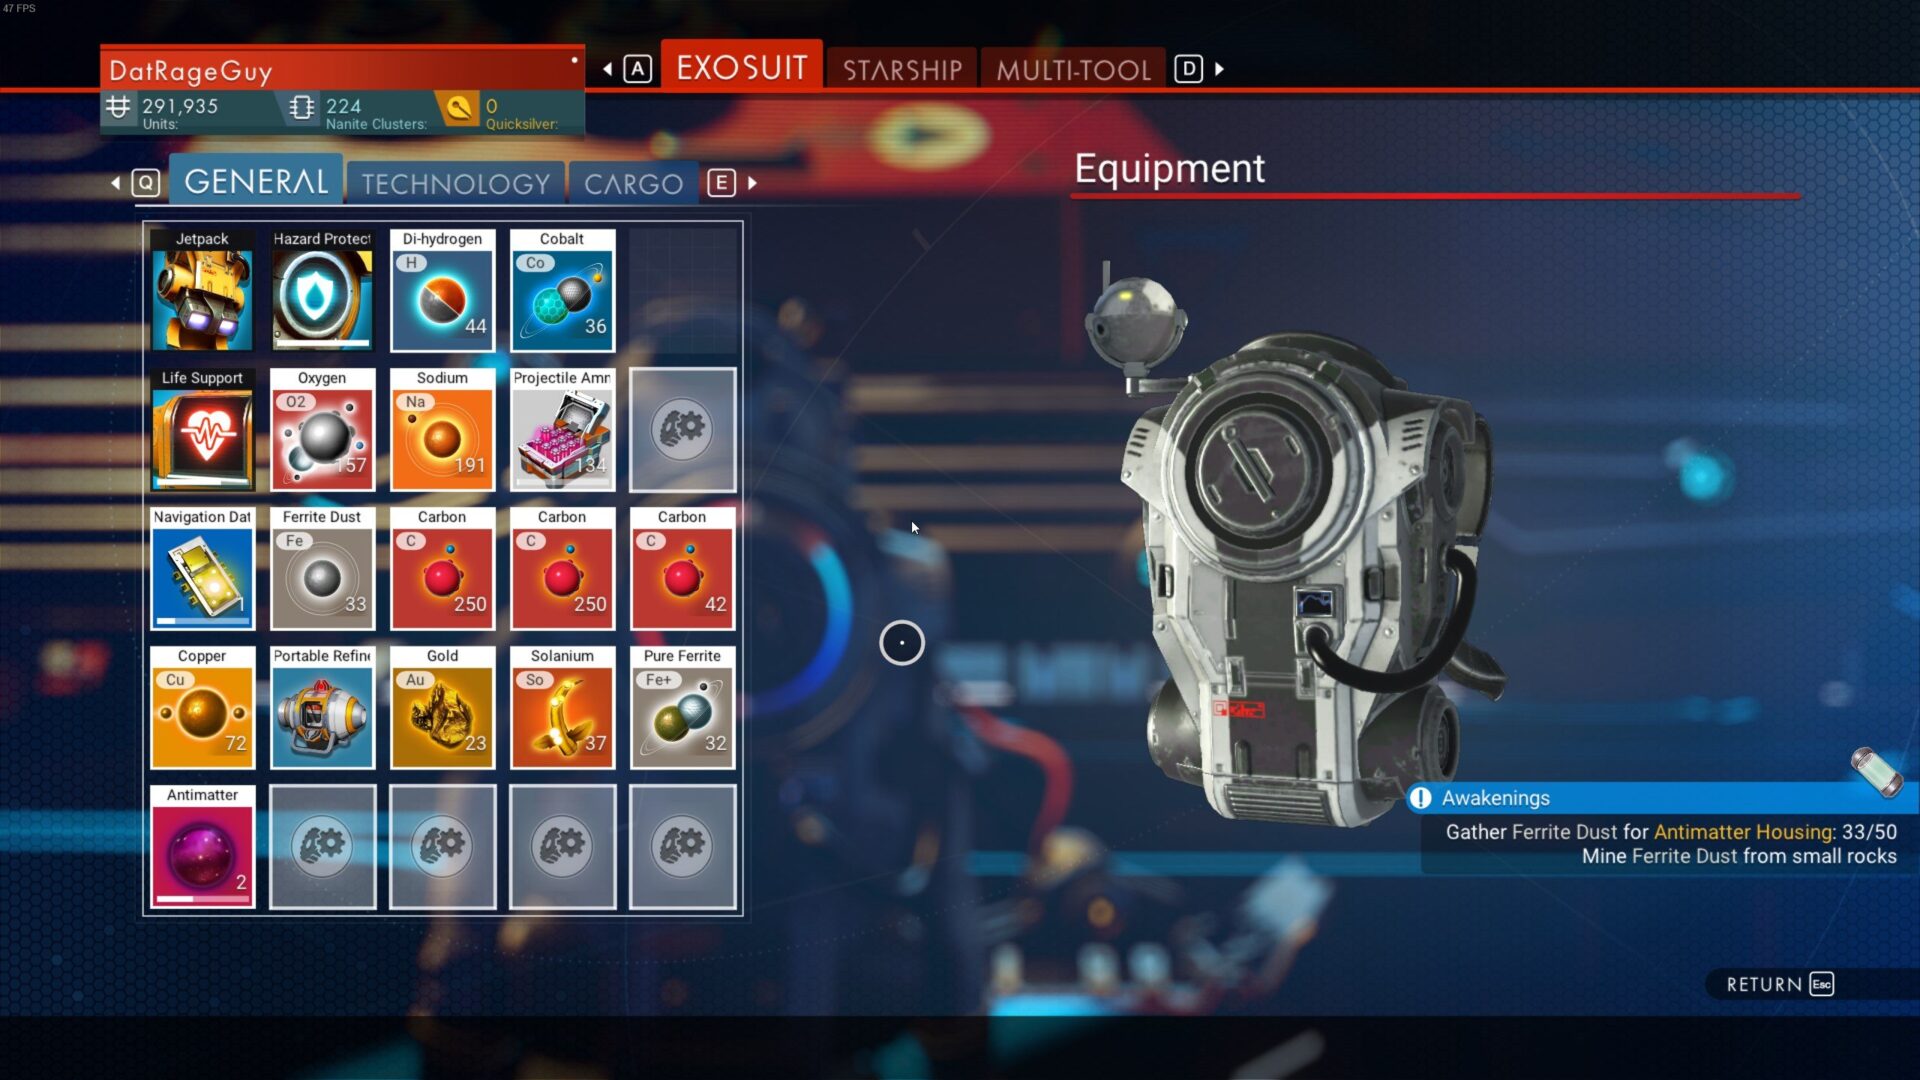 How To Get Upgrades For Exosuit In No Man's Sky